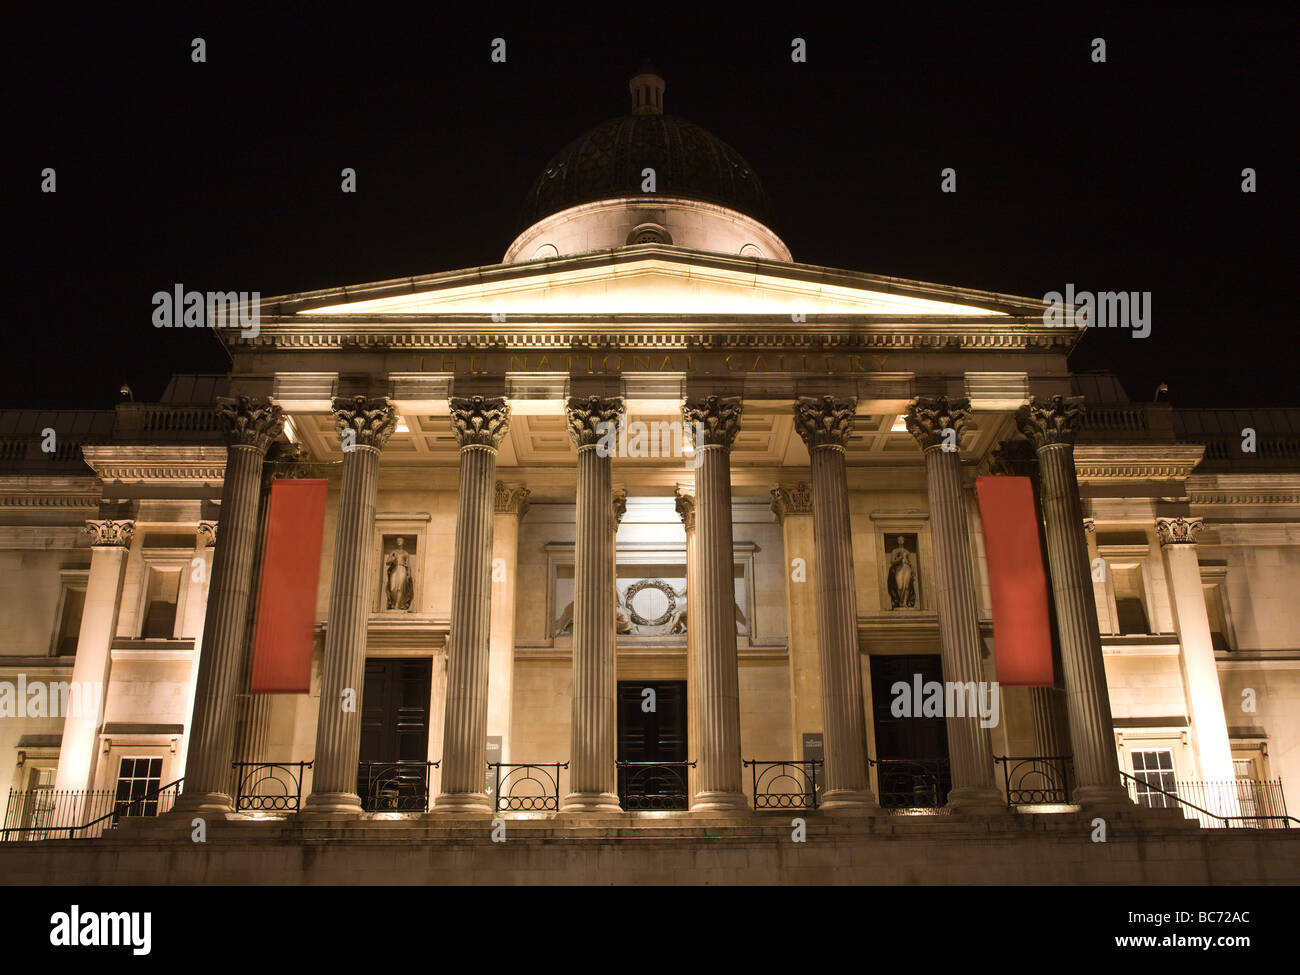 London - national galery in night Stock Photo